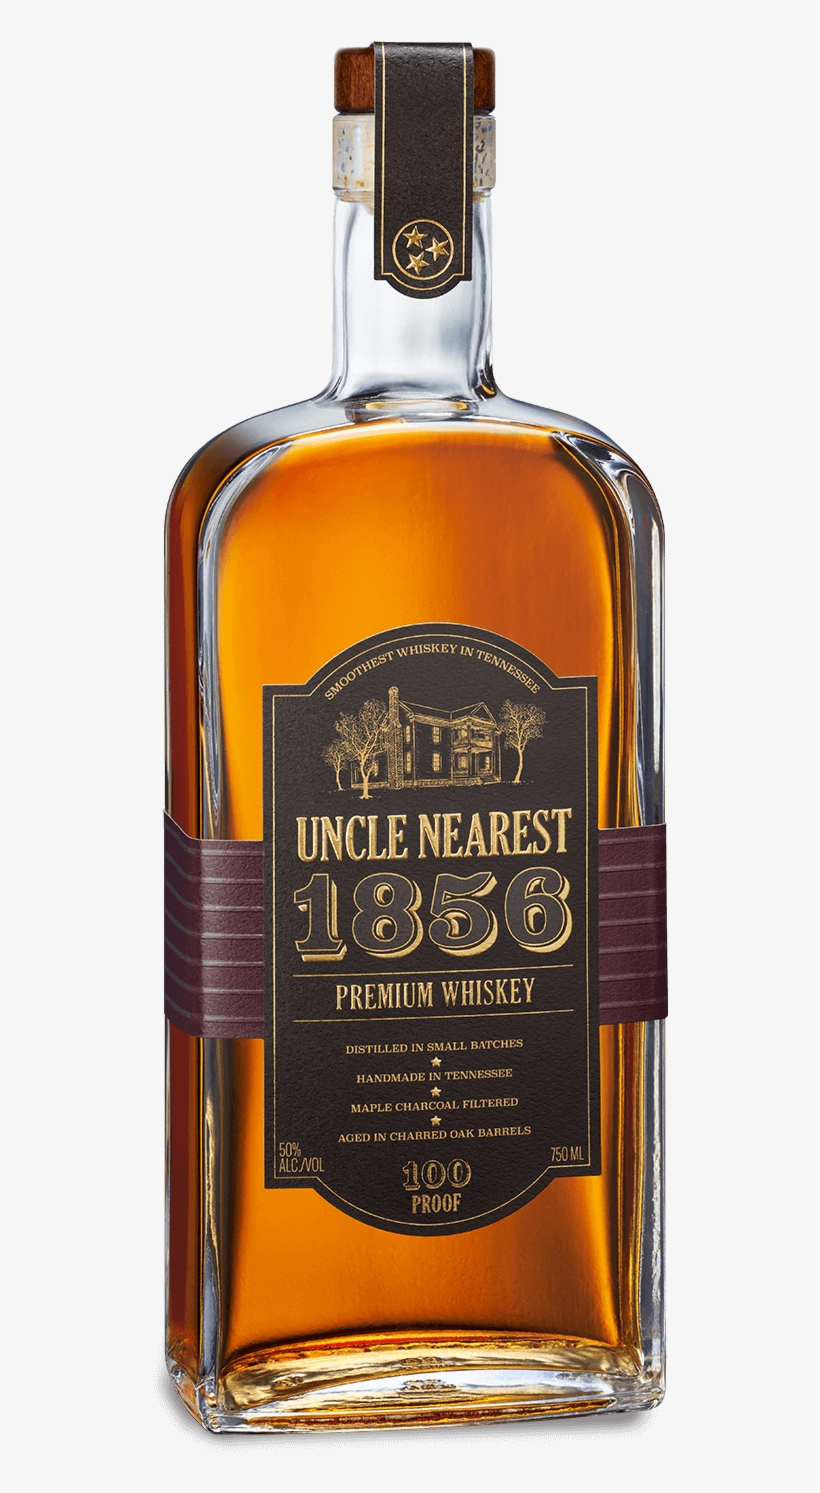 Premium Aged Whiskey - Uncle Nearest Whiskey Price, transparent png #1130932